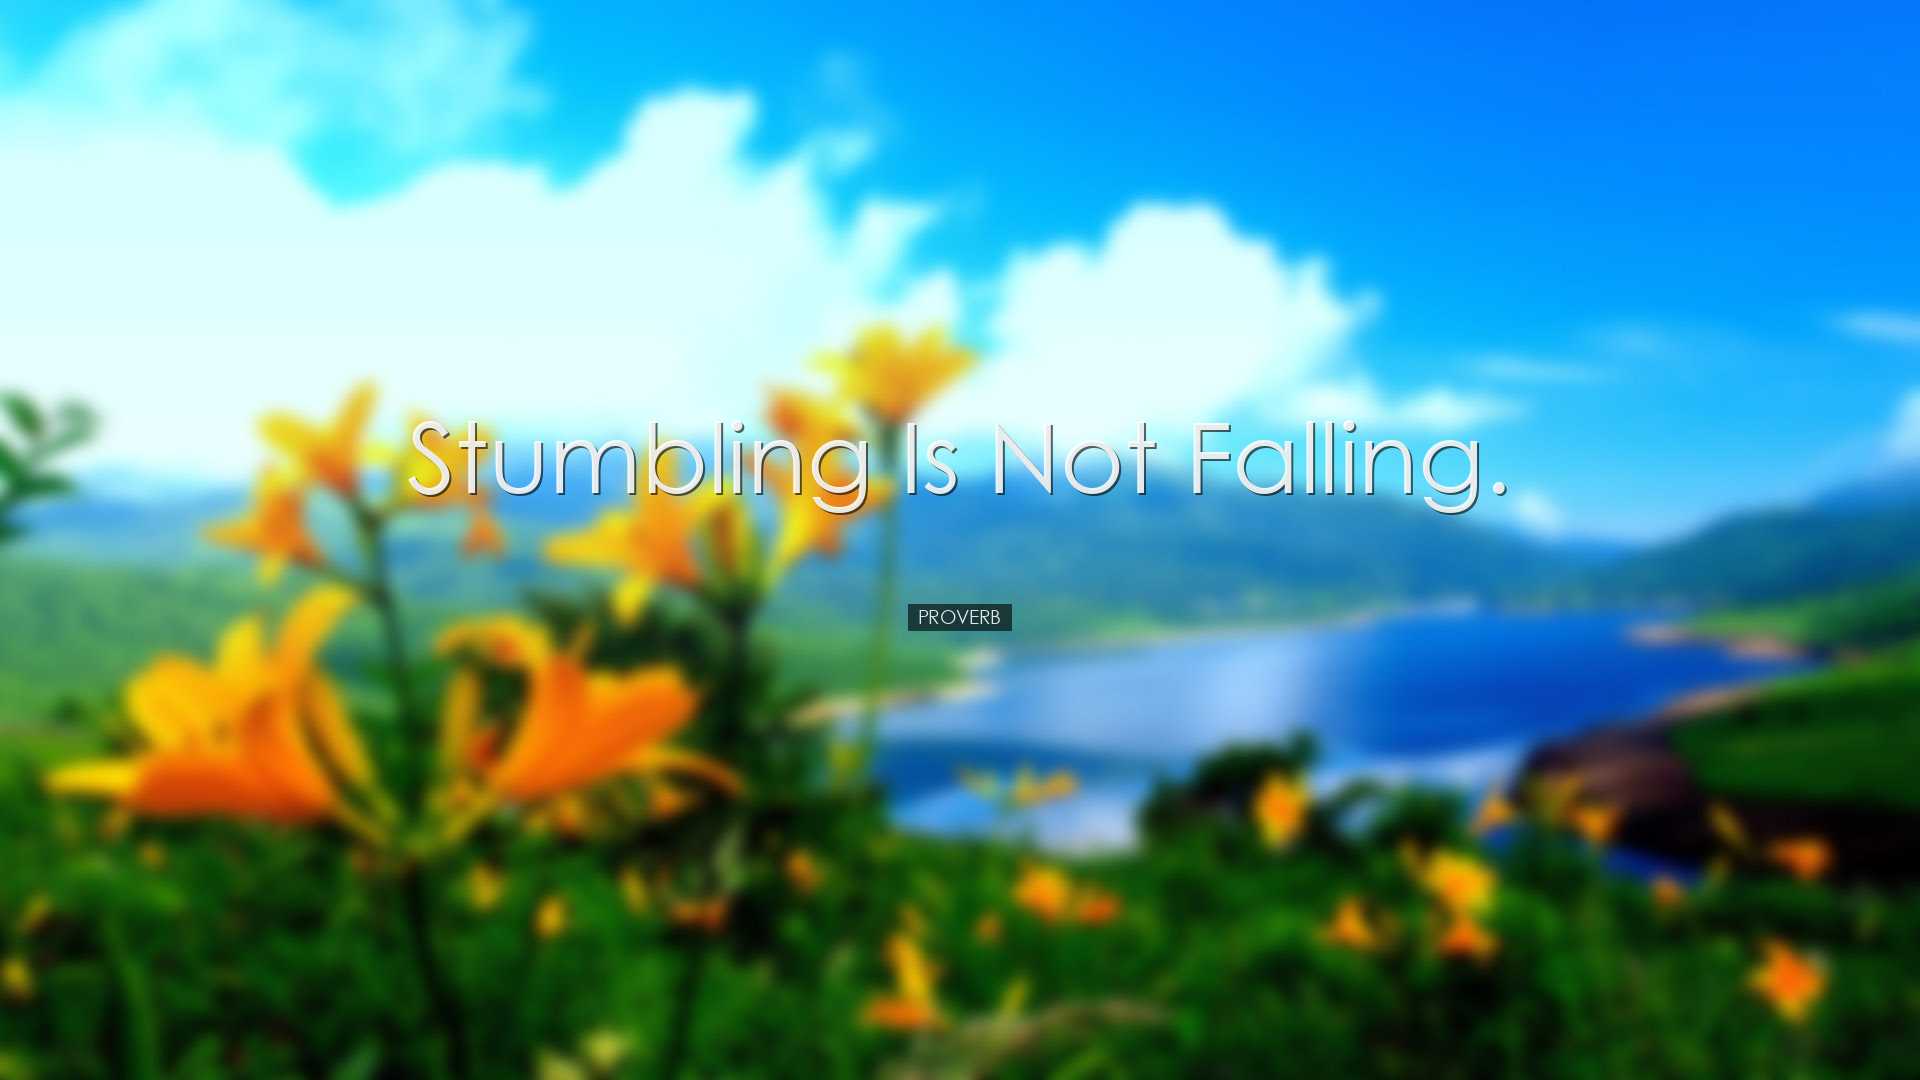 Stumbling is not falling. - Proverb